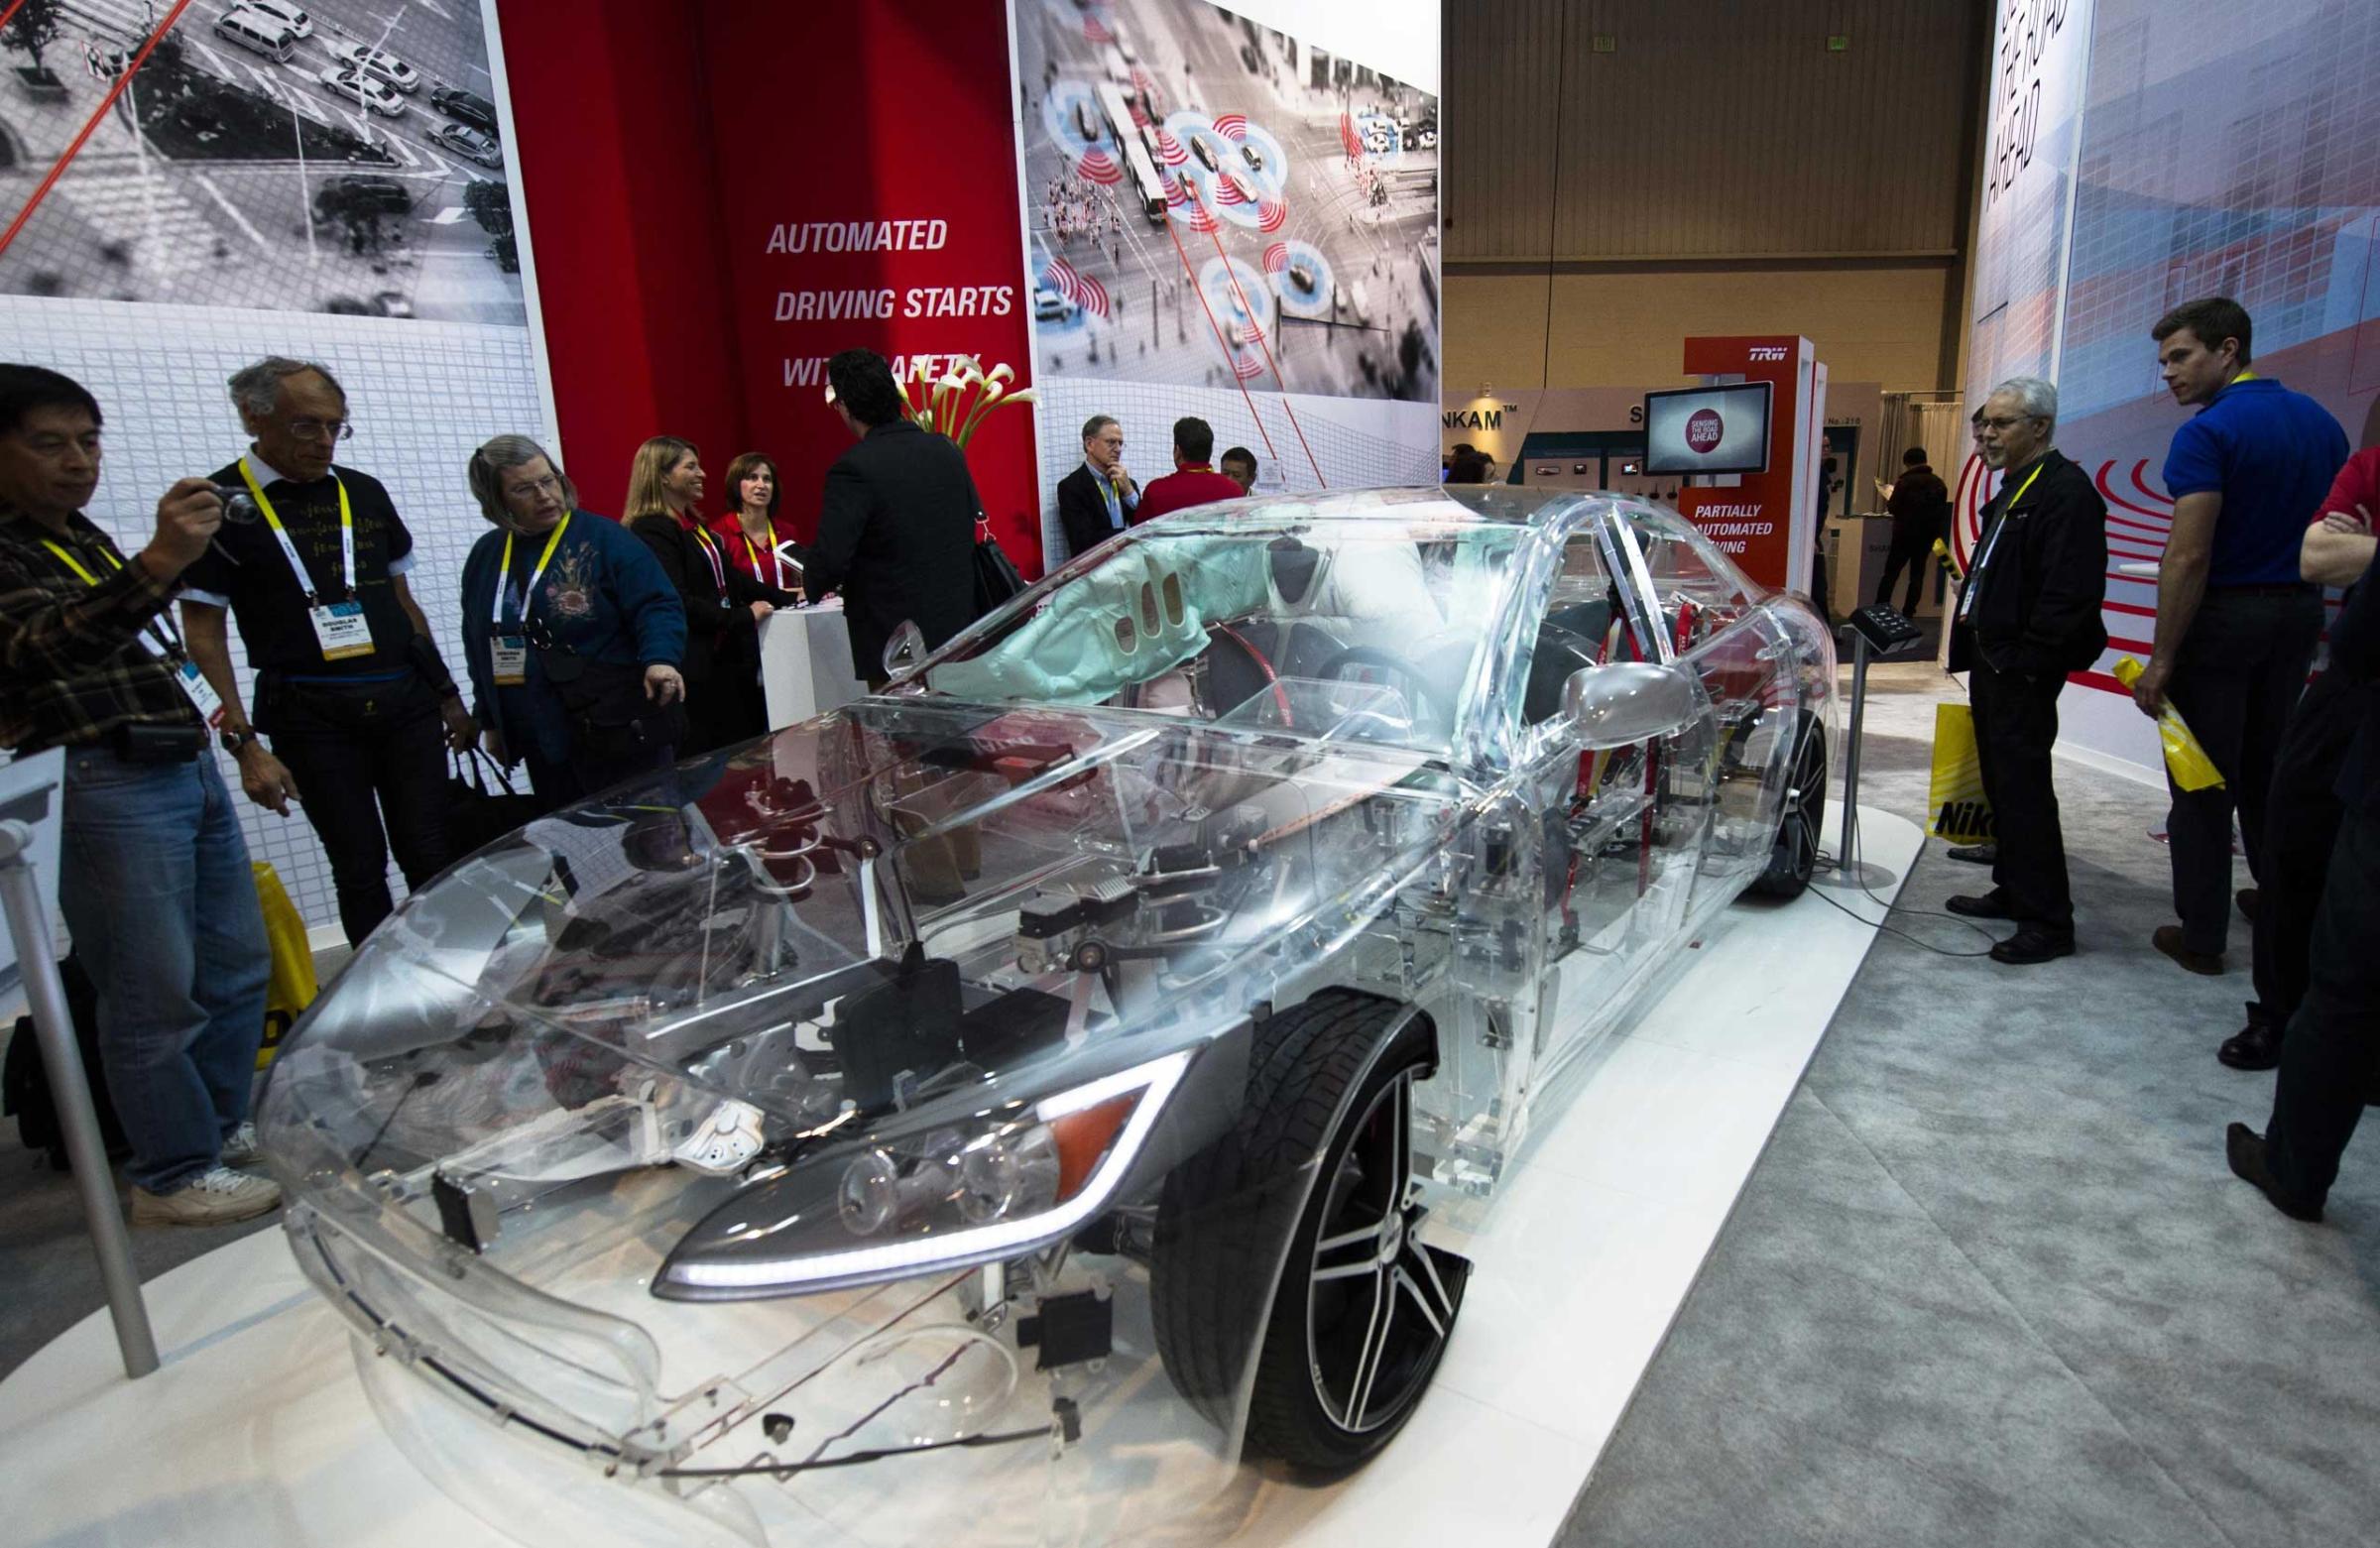 A transparent TRW model car is seen during the 2015 International Consumer Electronics Show (CES) in Las Vegas on Jan. 6, 2015.